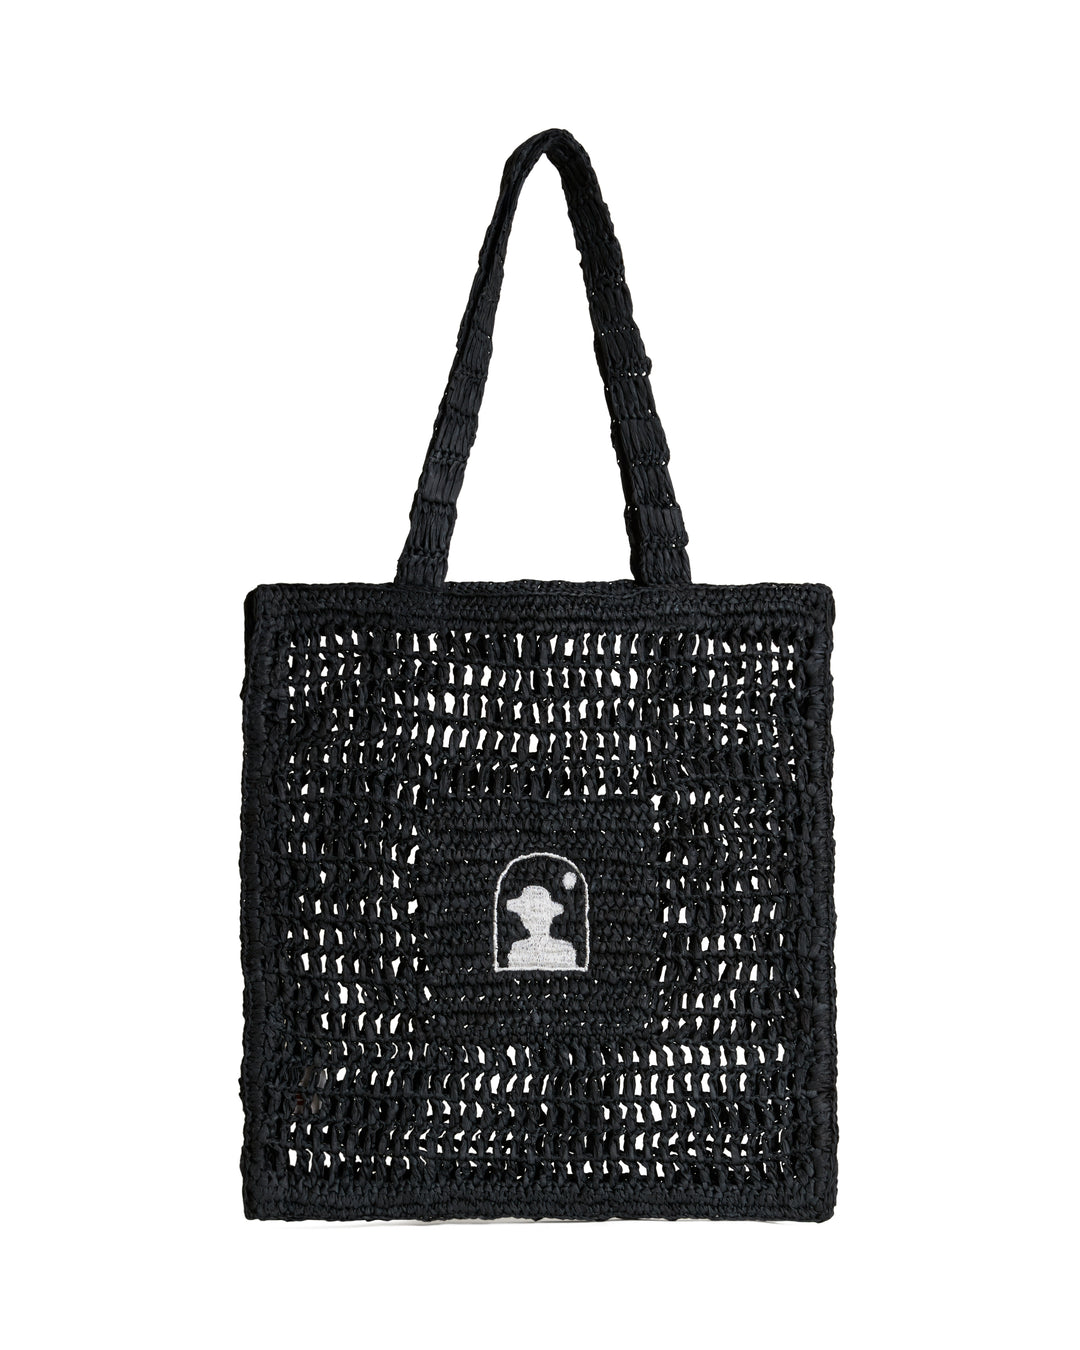 The Amabile Raffia Bag - Onyx by Dandy Del Mar, with a white silhouette patch of a human profile on the front, crafted from raffia-effect yarn, isolated on a white background.